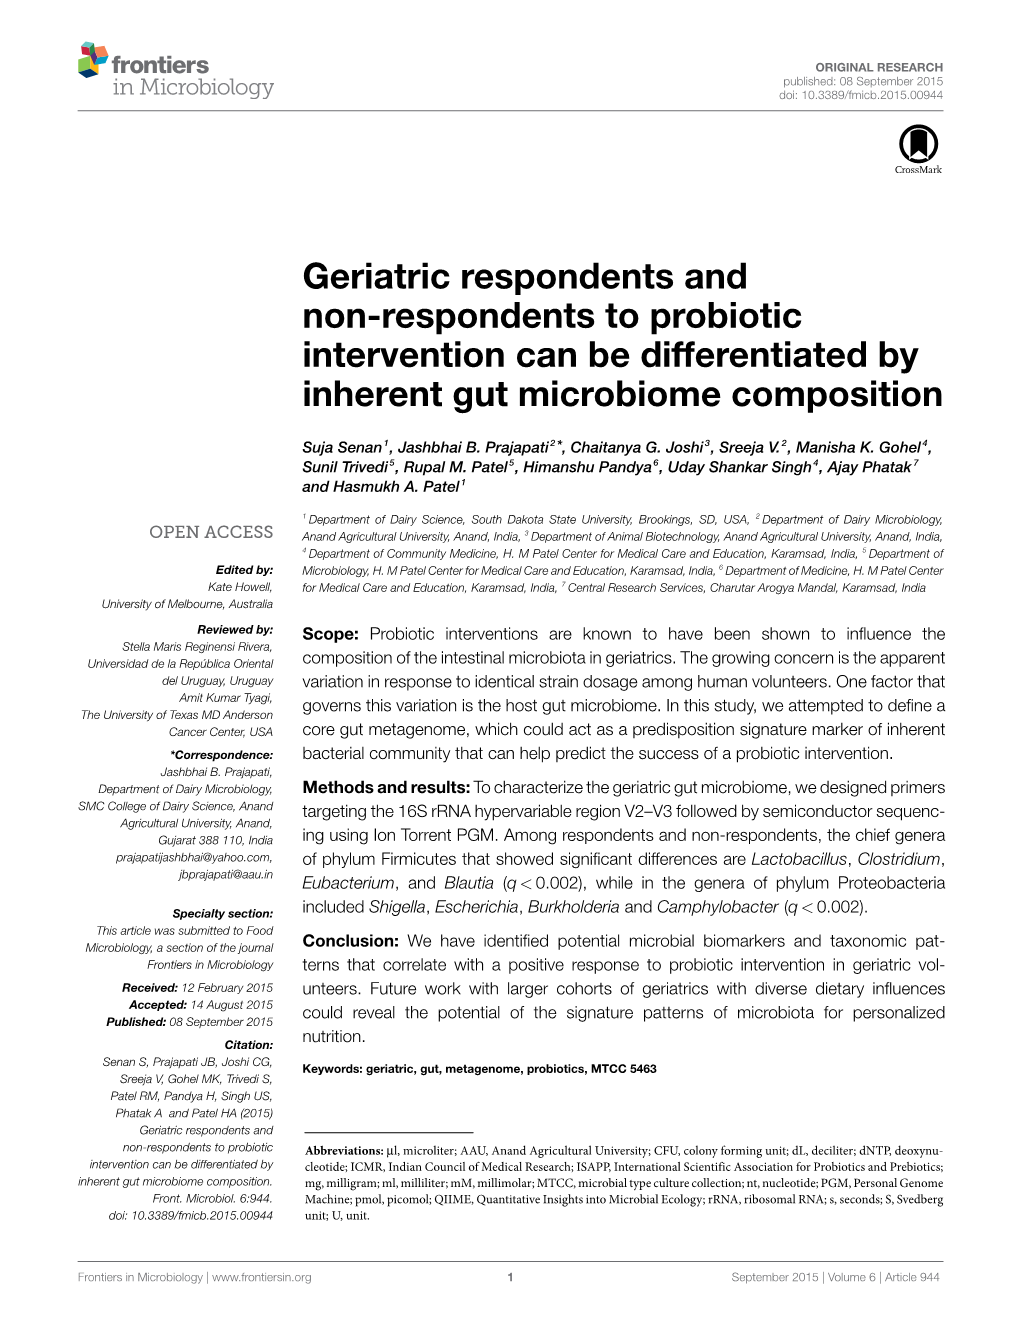 Geriatric Respondents and Non-Respondents to Probiotic Intervention Can Be Differentiated by Inherent Gut Microbiome Composition